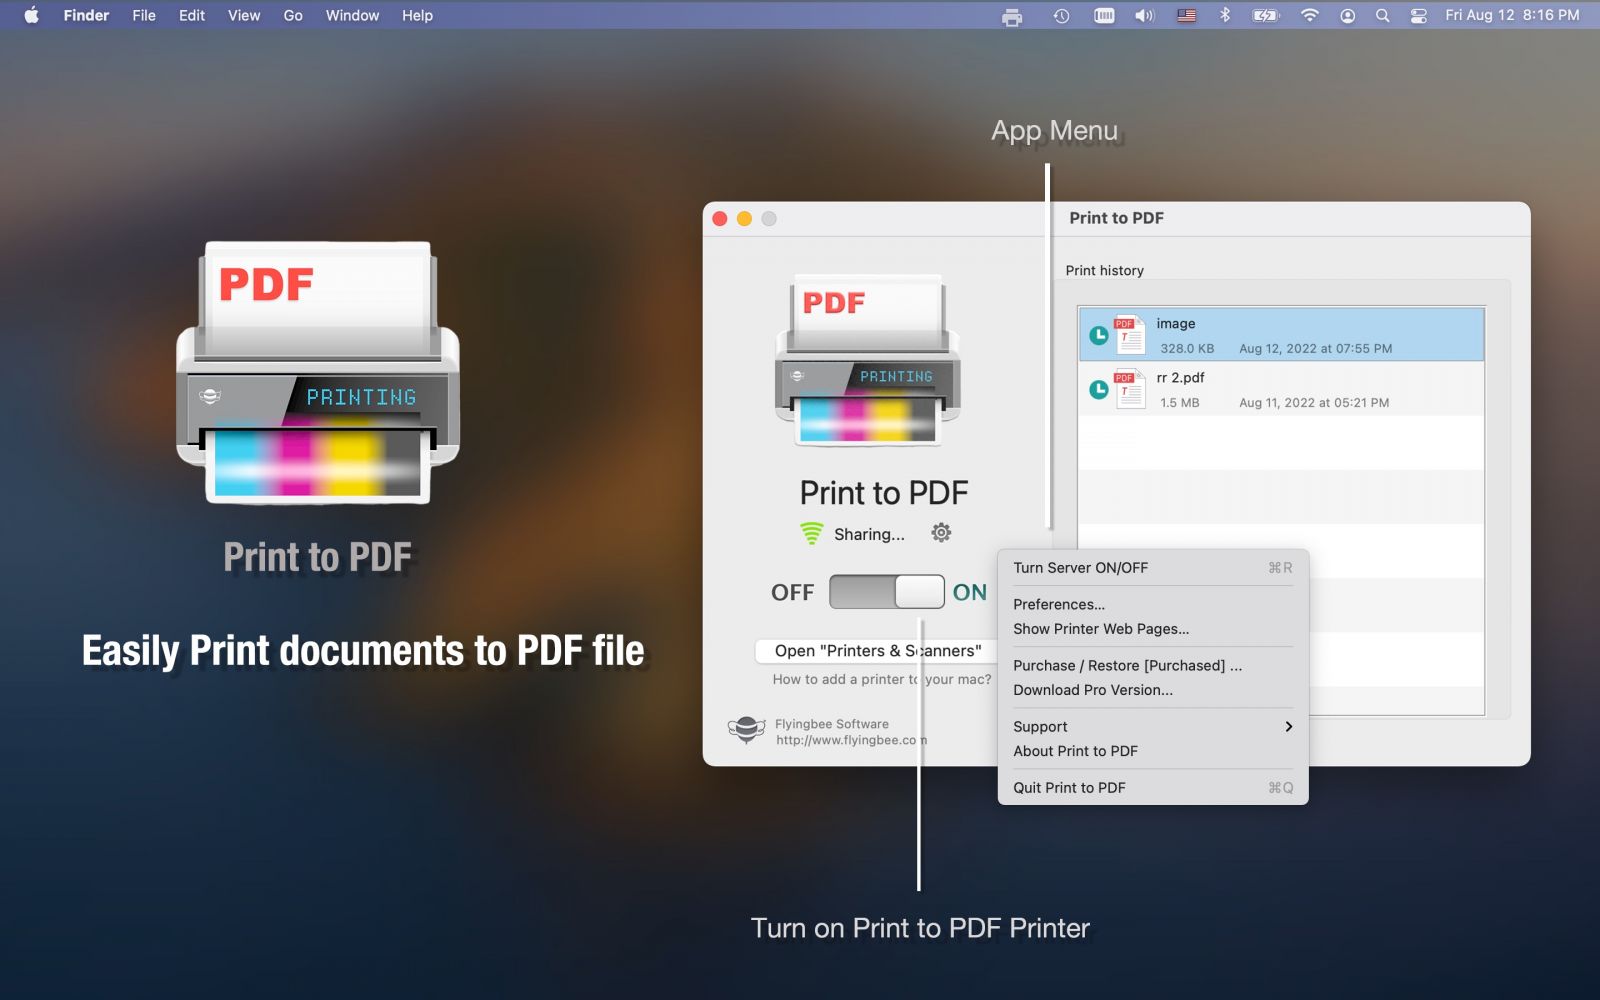 How to Add a printer your printer so you can use it on Mac? - Flyingbee Software